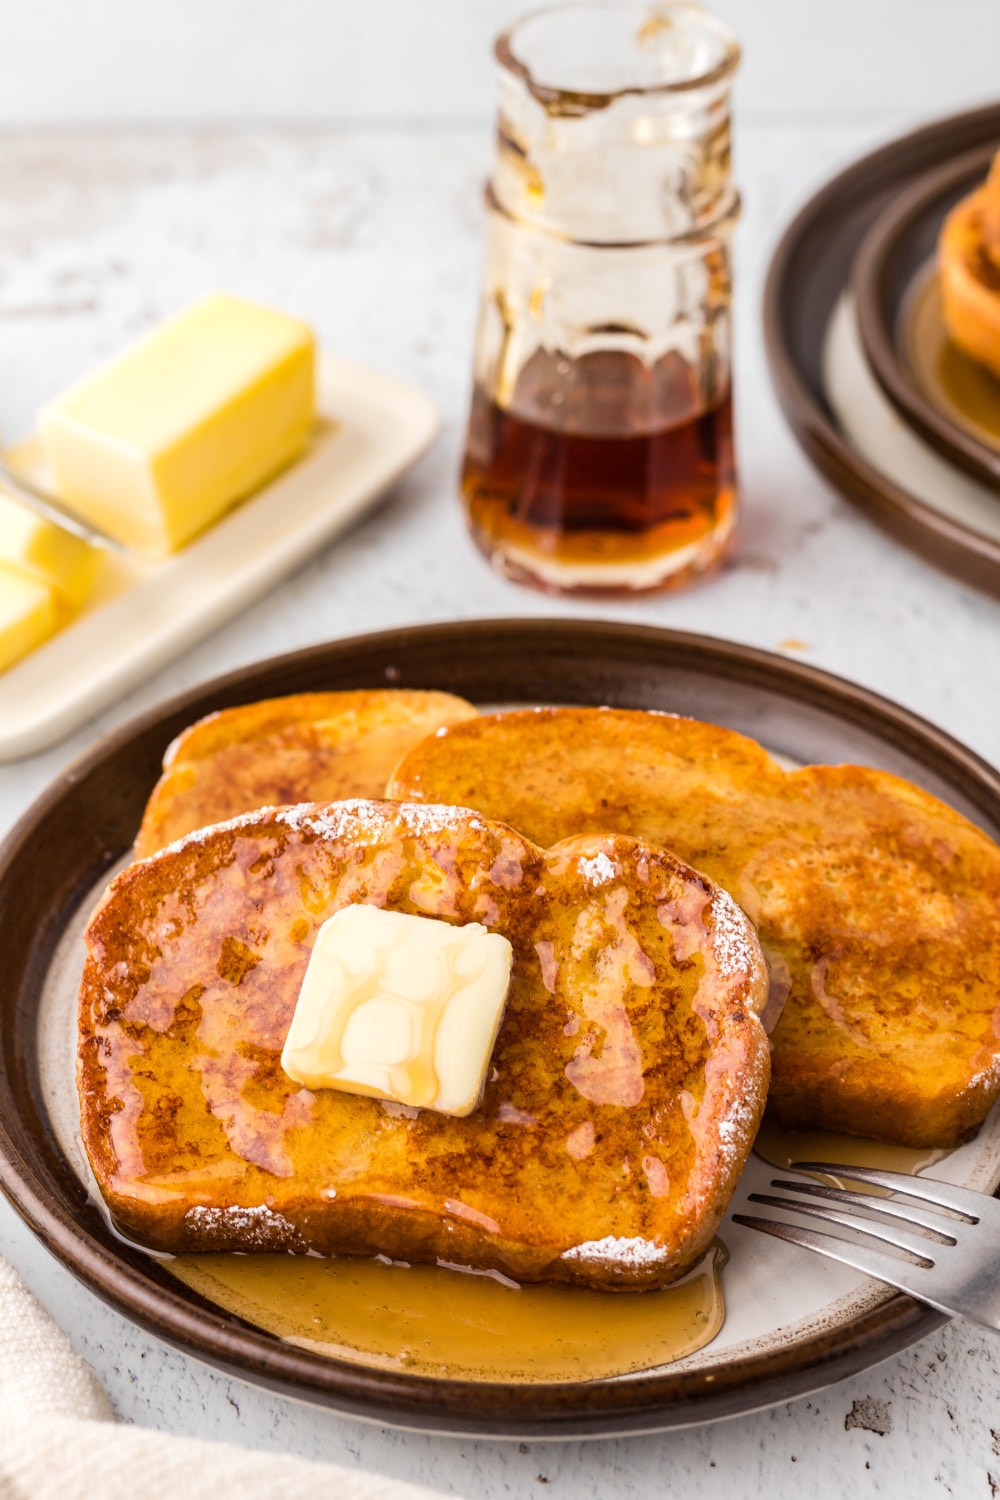 Three slices of French Toast with maple syrup and a pat of butter.